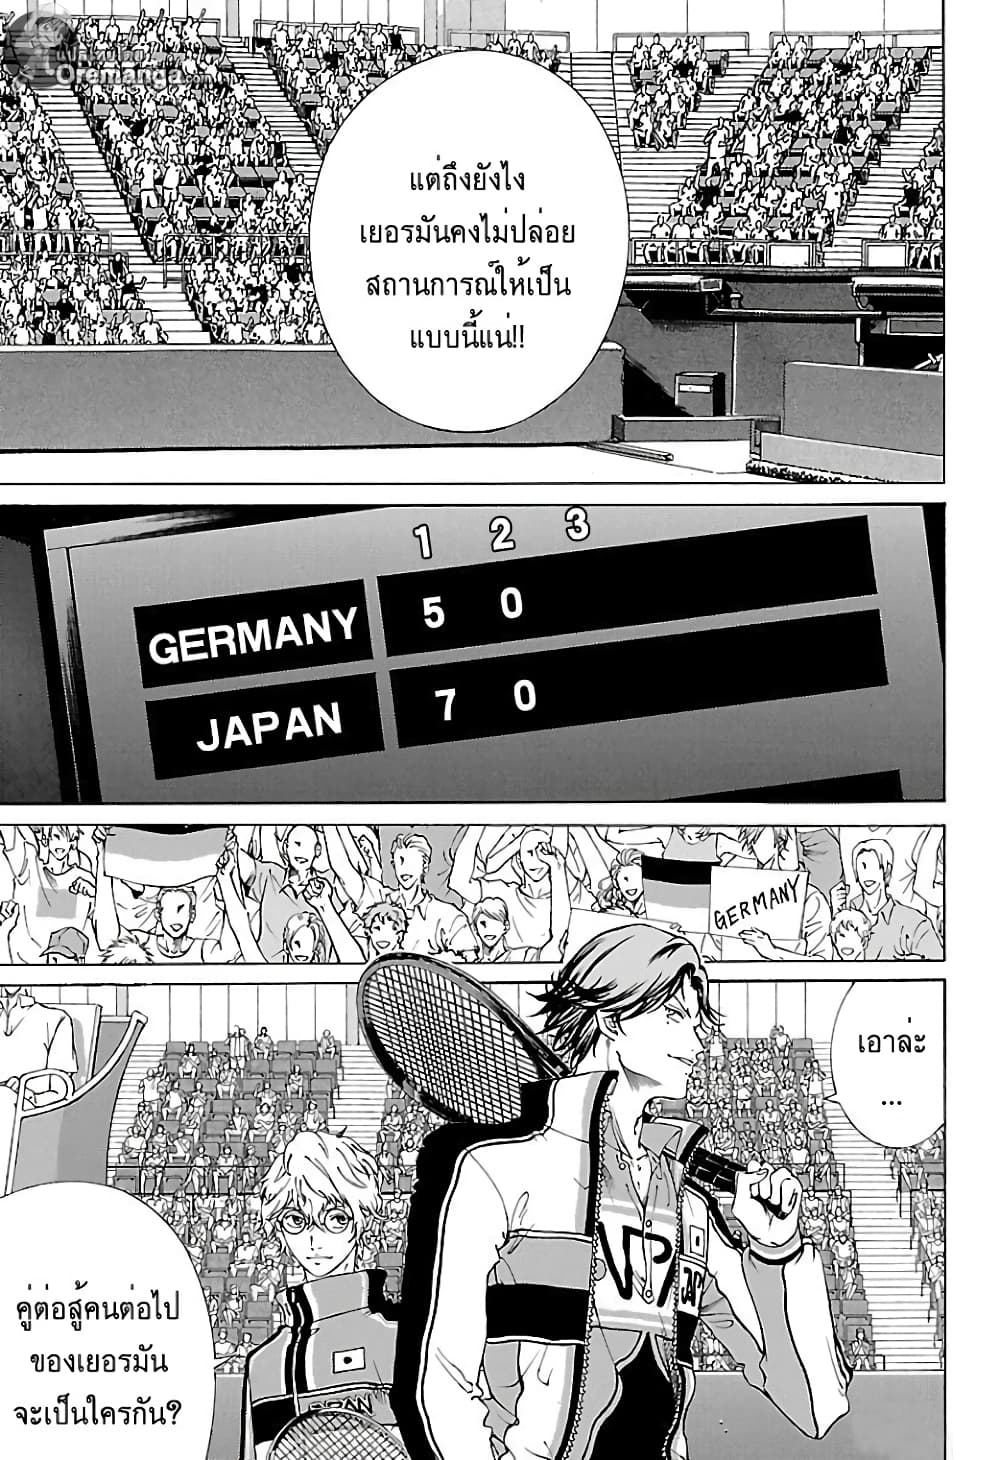 New Prince of Tennis 149-Quality of Perfect